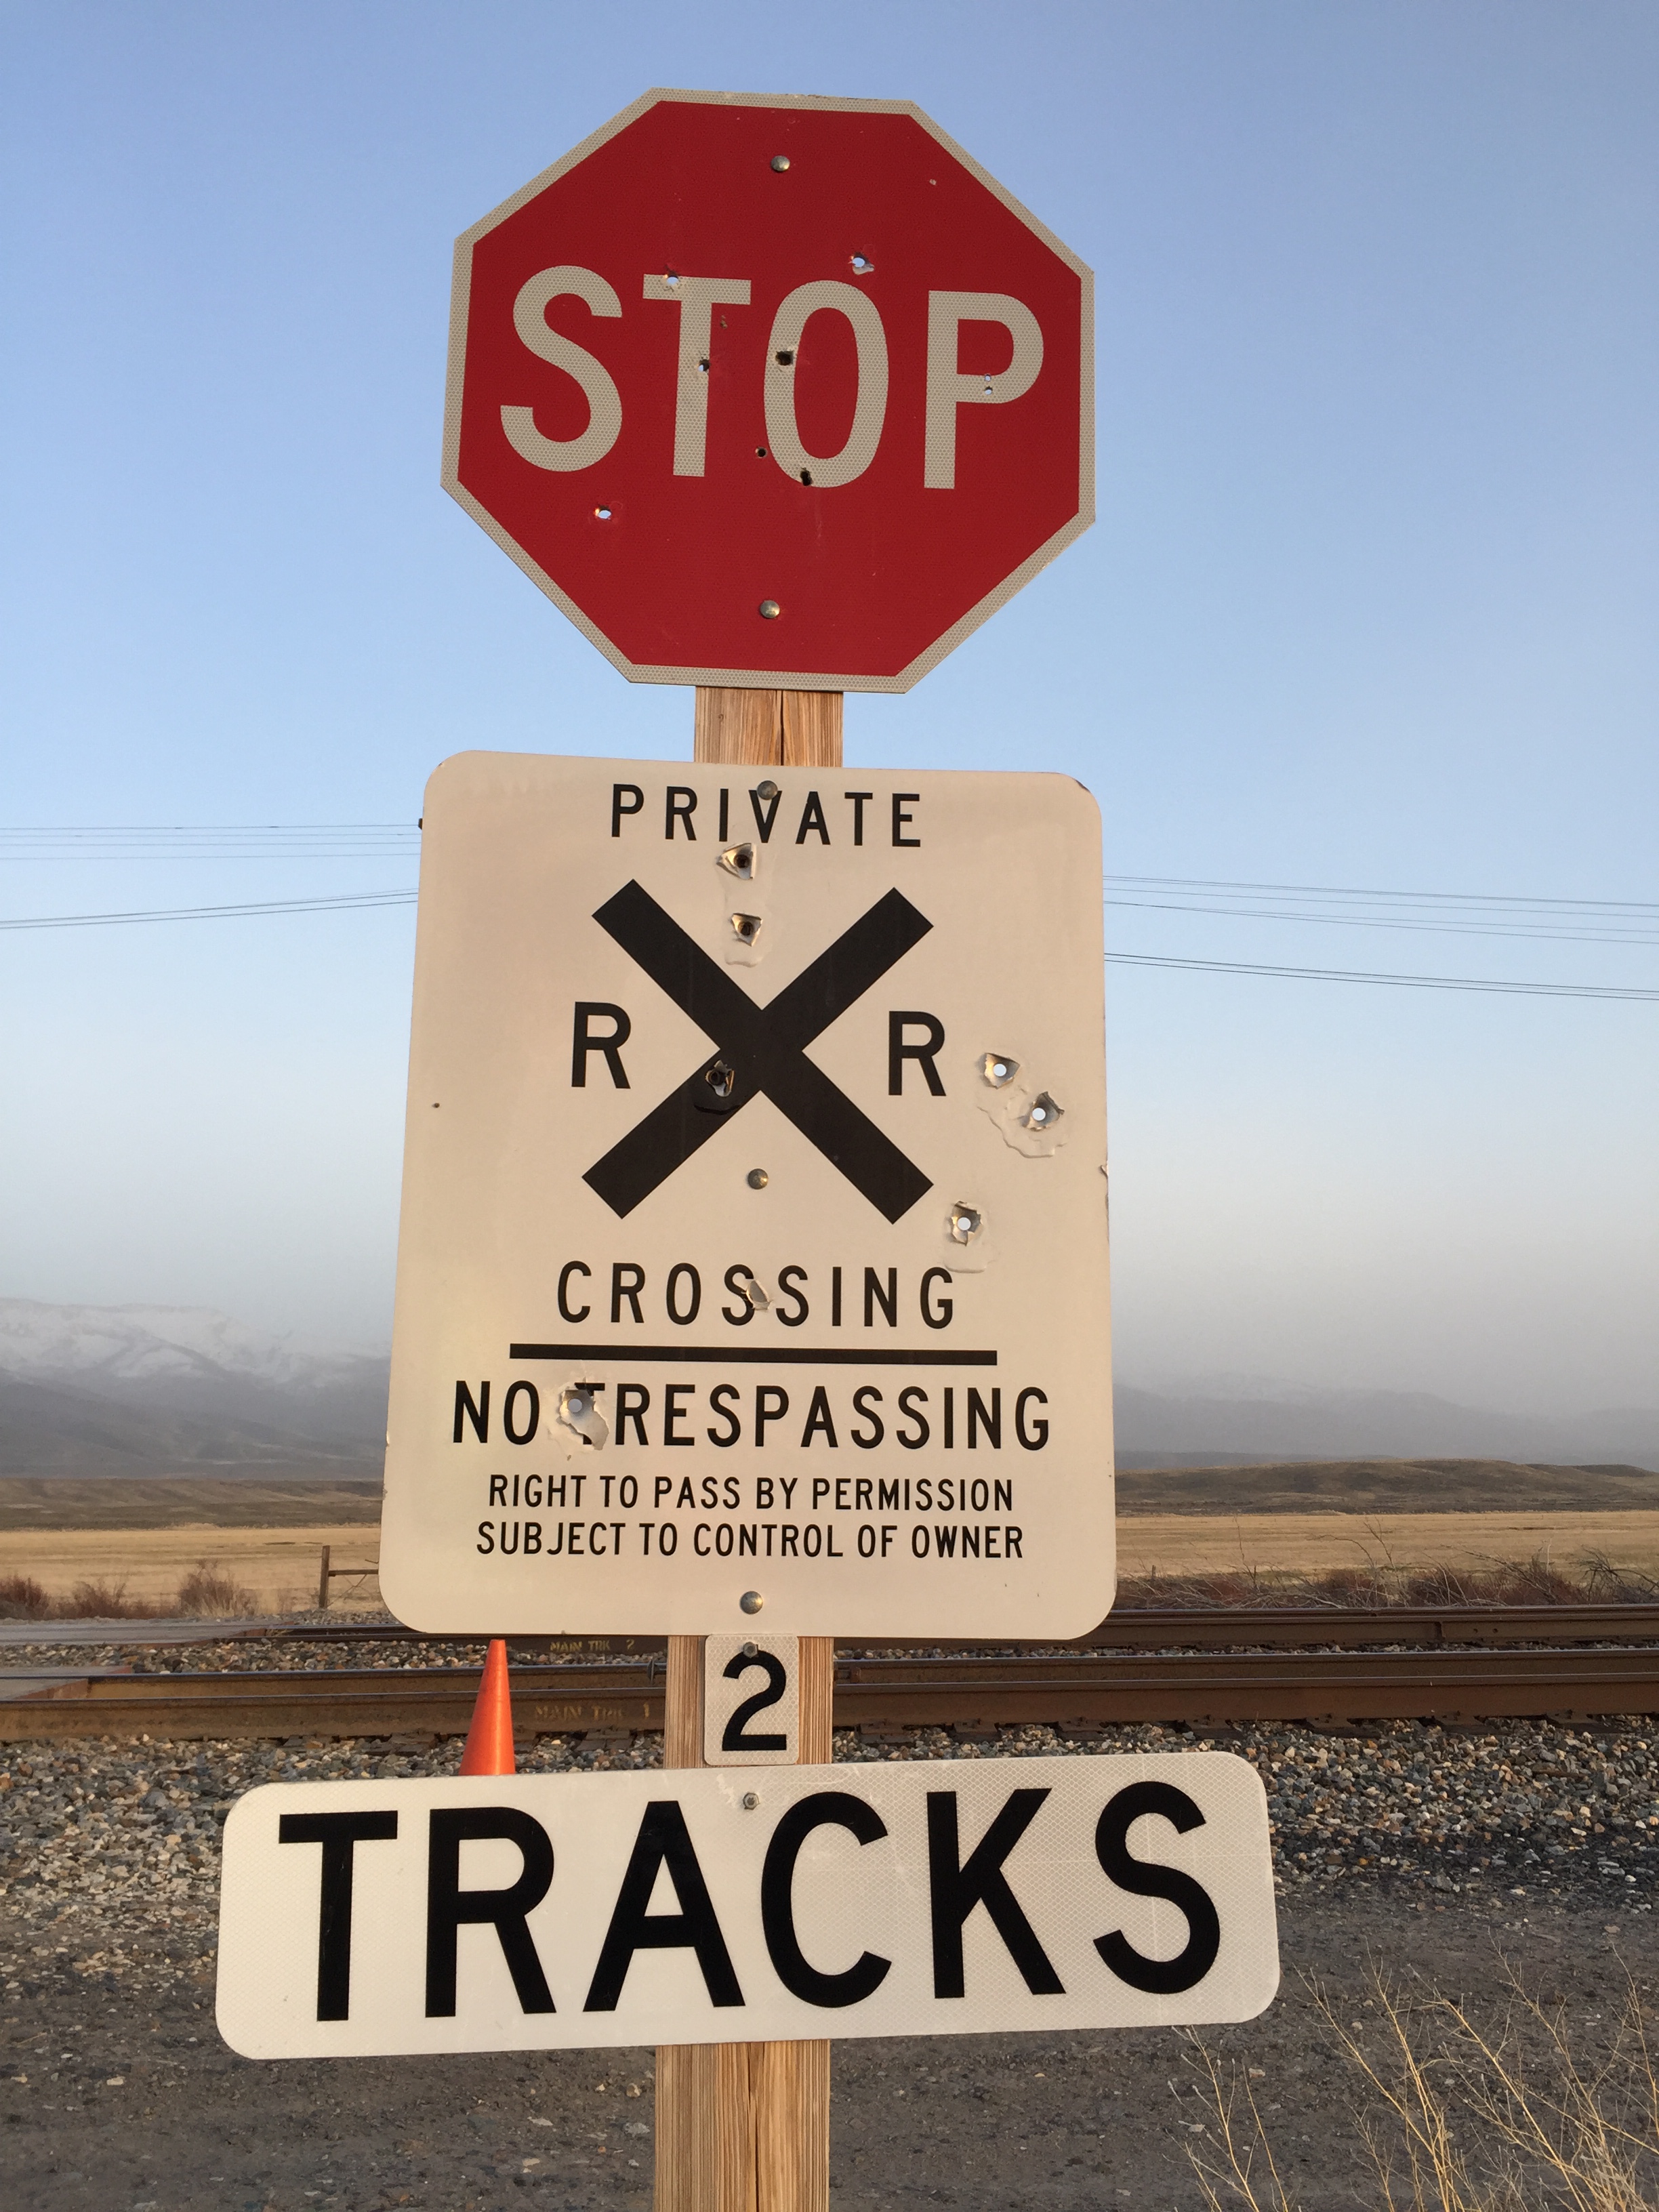 File 15 03 31 18 43 47 Sign At A Private Railroad Level Crossing In Deeth Nevada Jpg Wikimedia Commons